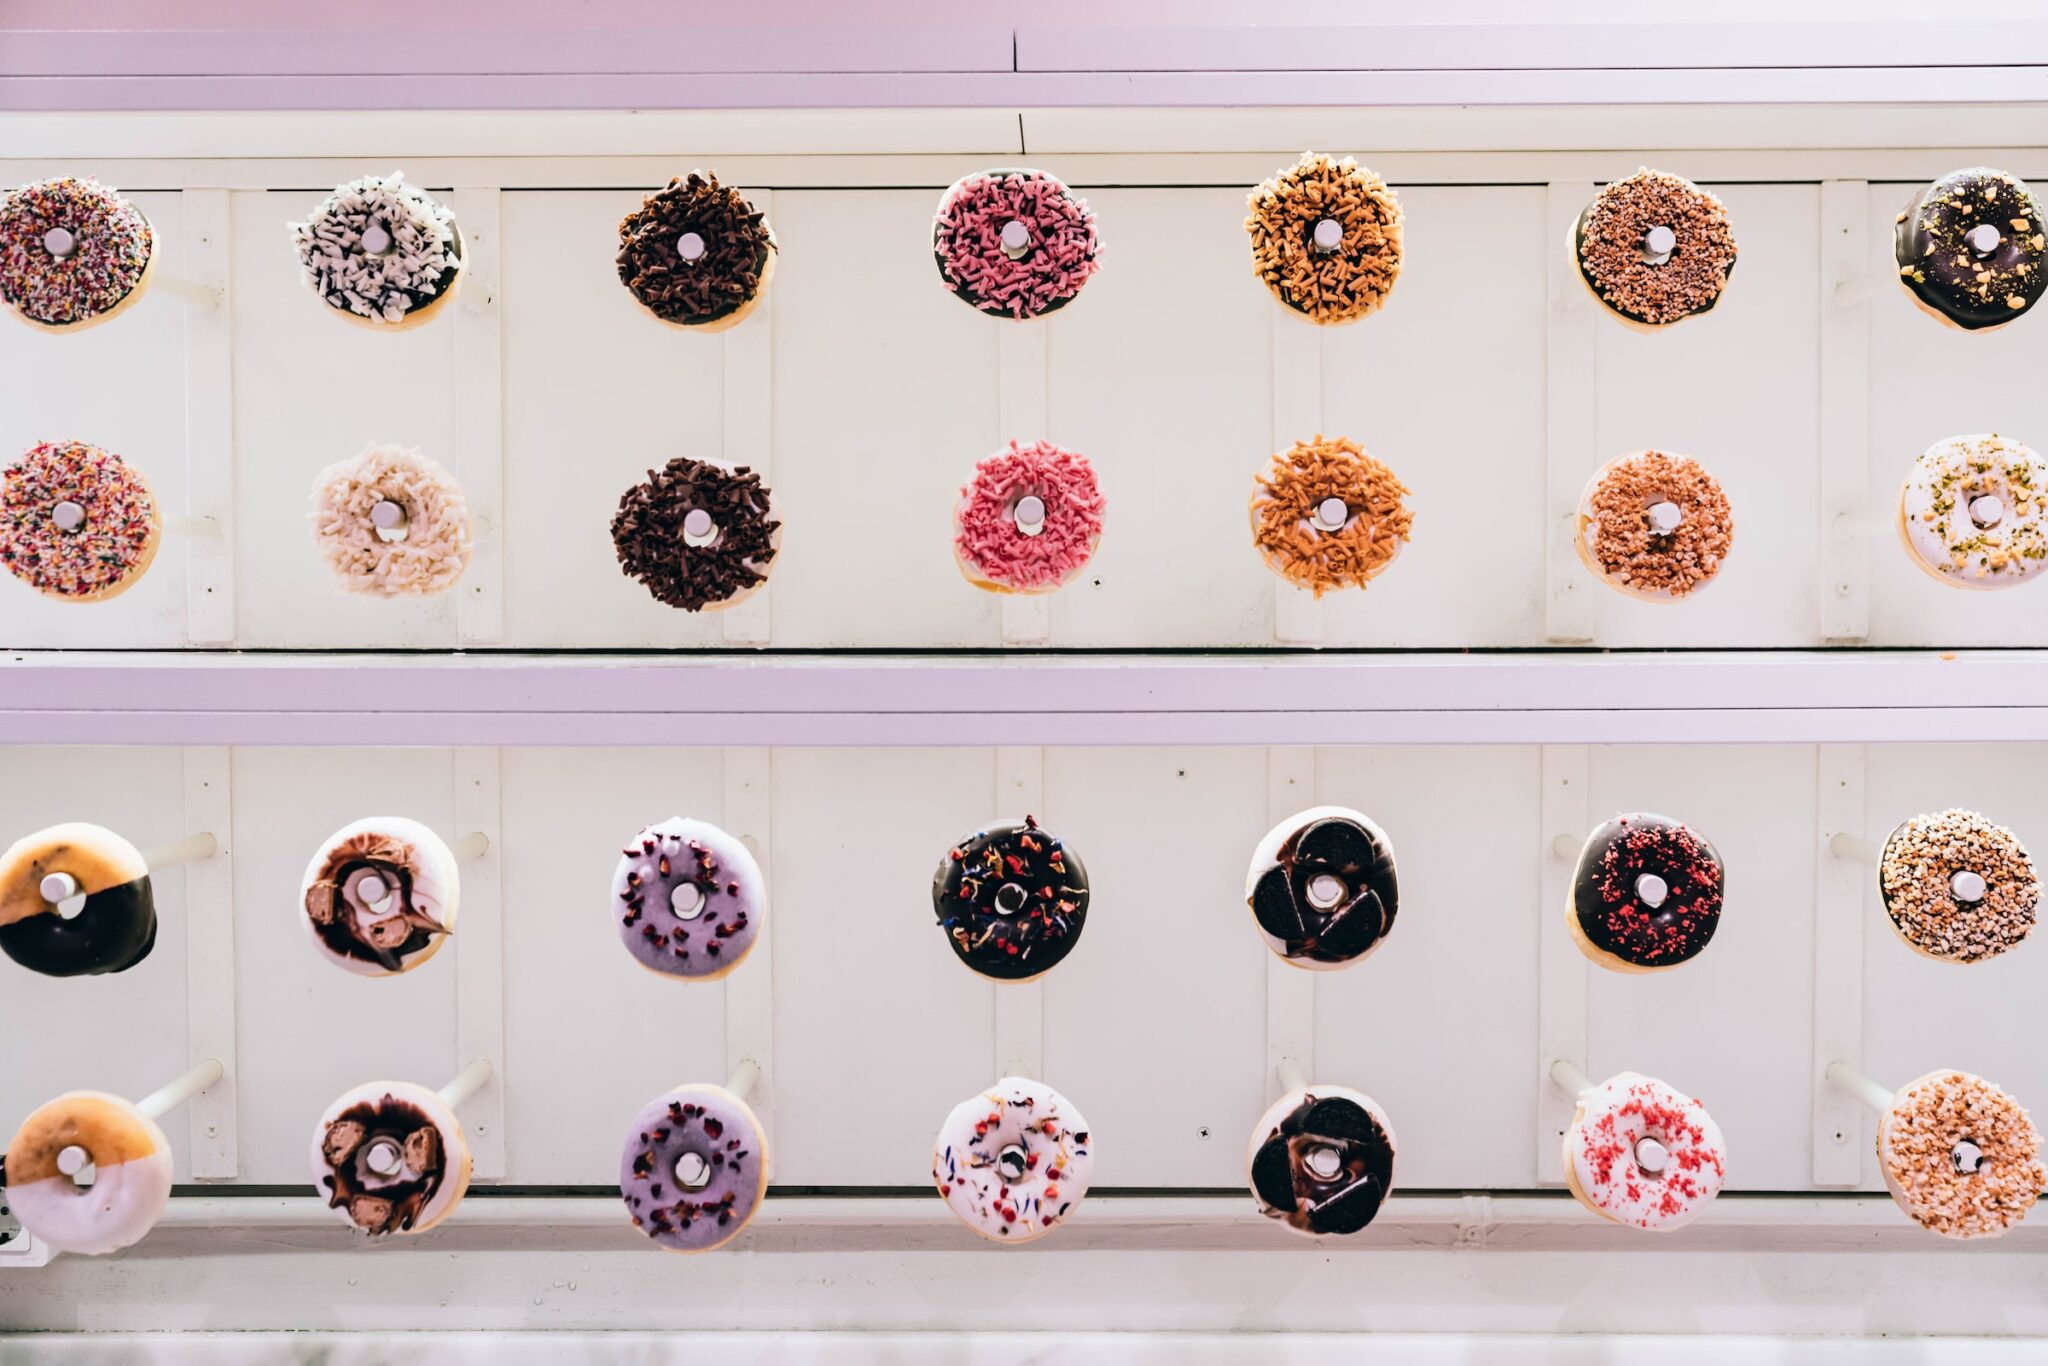 Dunkin' Donuts reveals plans to overhaul its DD Perks loyalty program later this year.